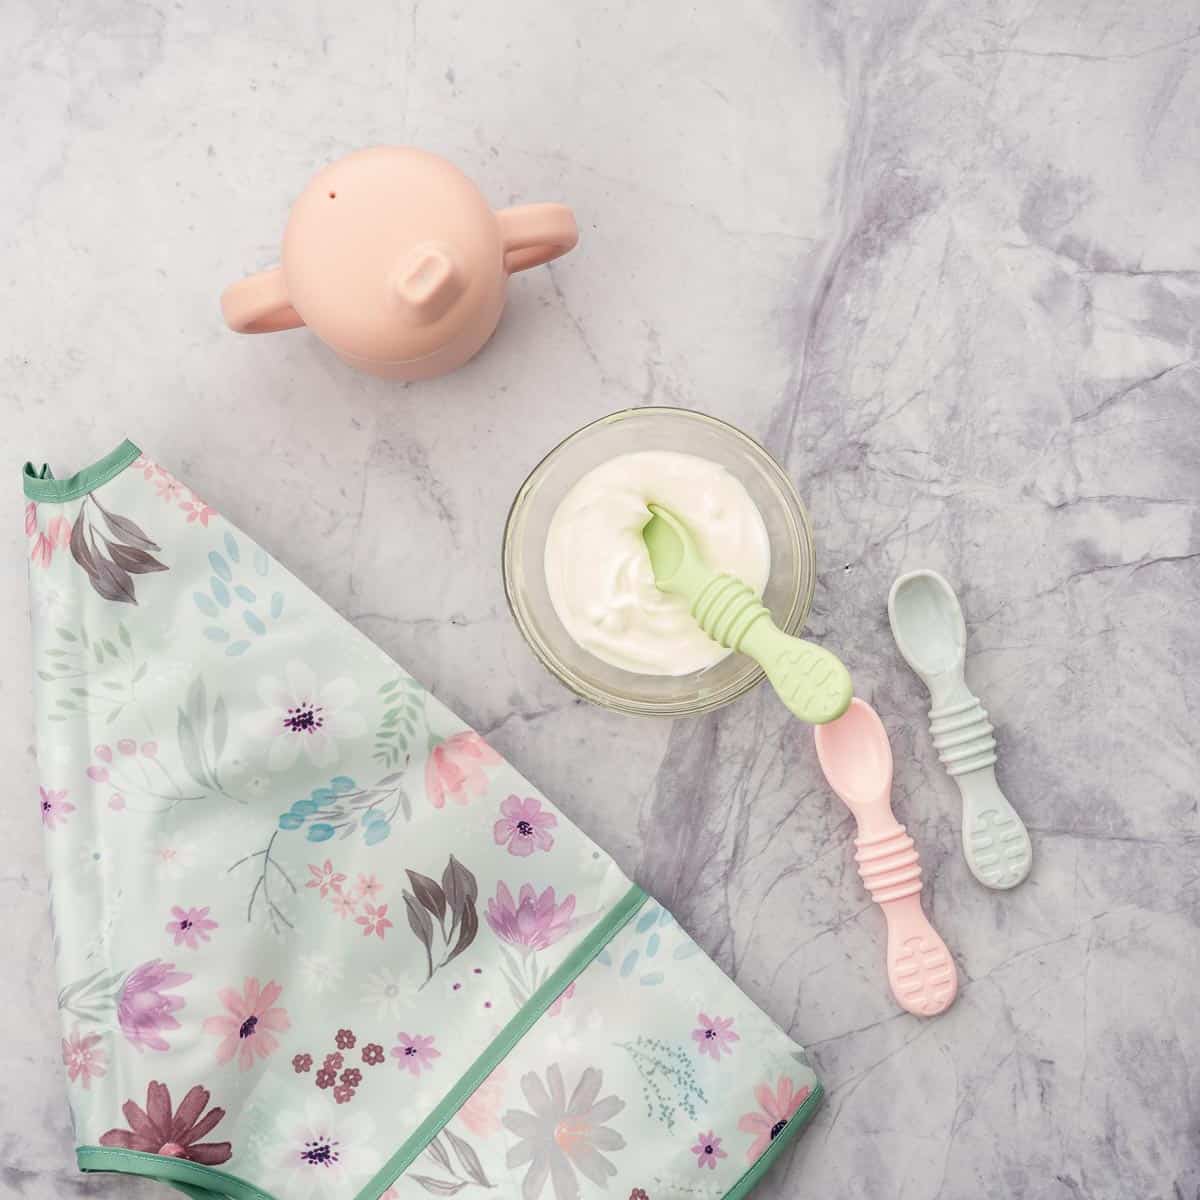 A small bowl of yogurt with baby spoons, a pink sippy cup and a floral bib.